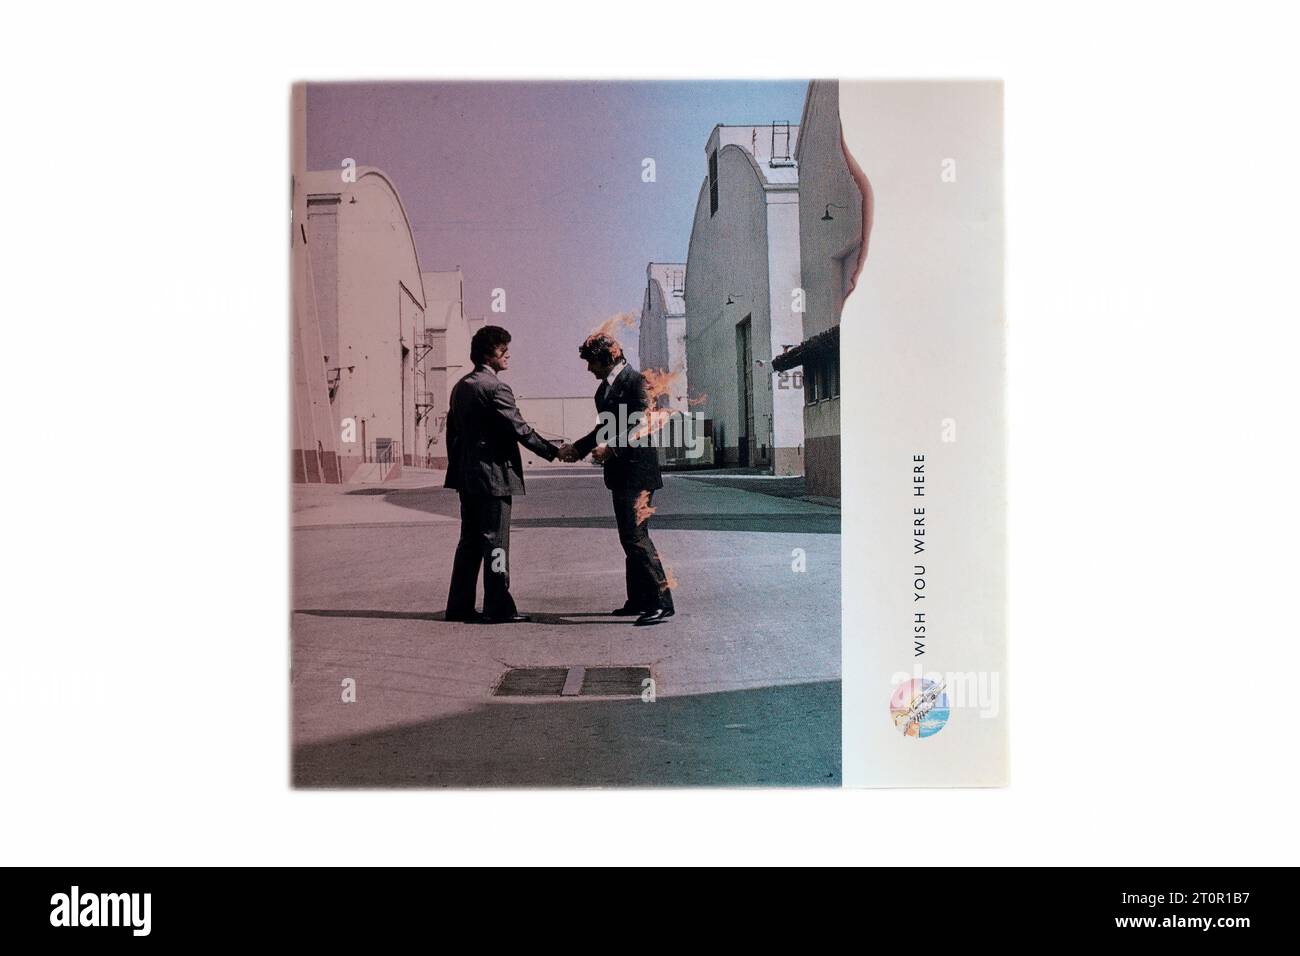 Wish You Were Here, by Pink Floyd CD case artwork on light background Stock Photo